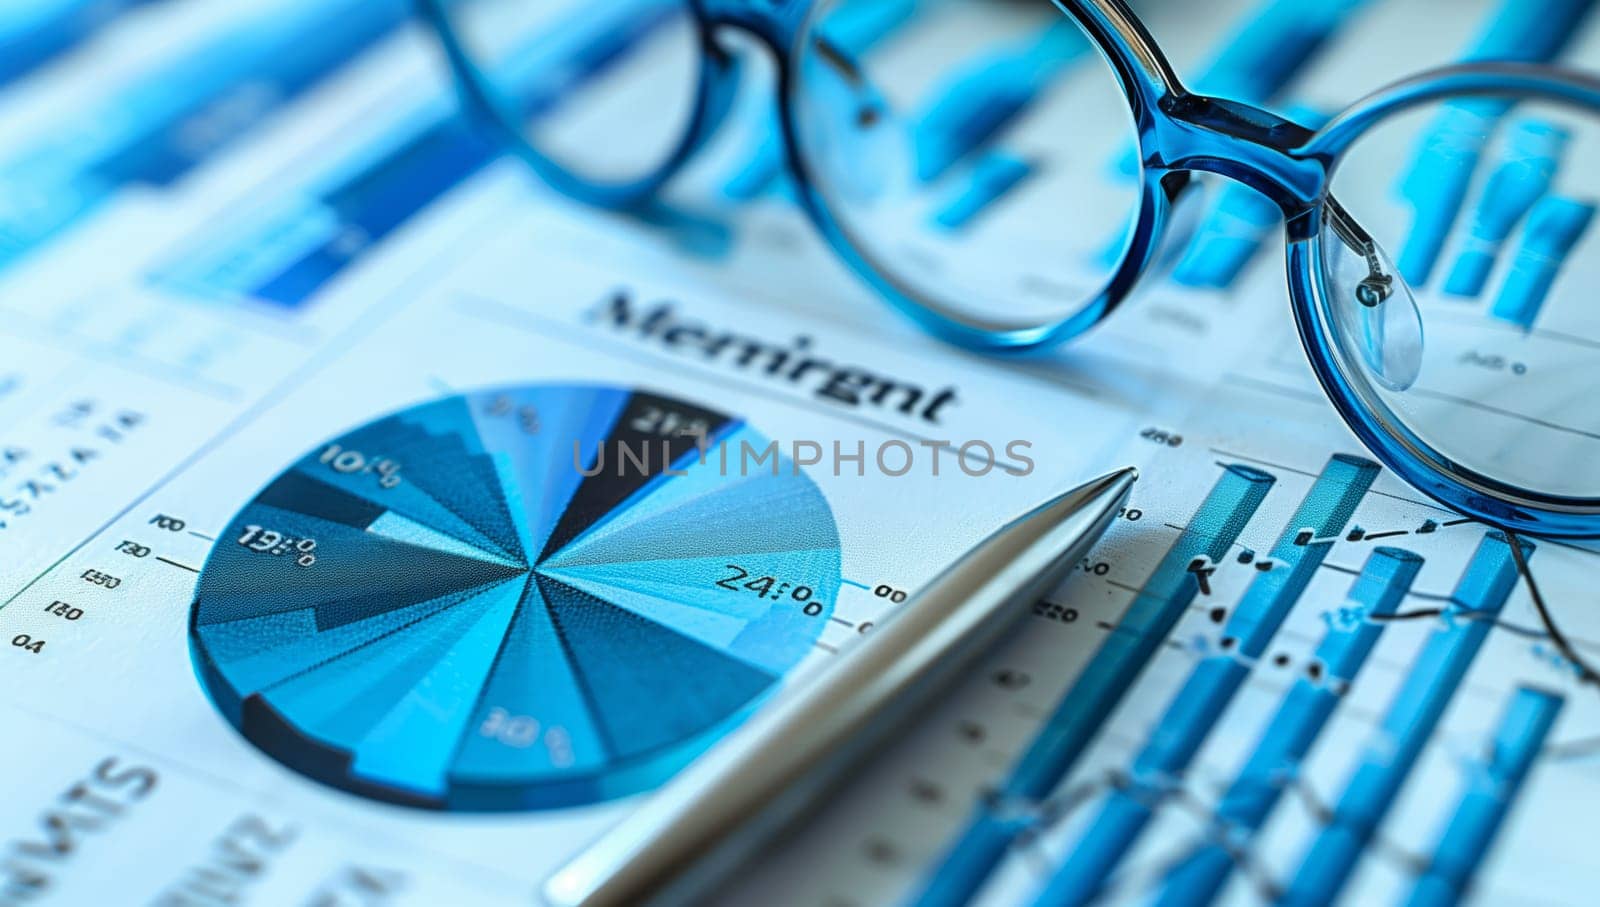 A pair of Azure glasses and a Electric blue pen are placed on top of a circular Aqua pie chart, surrounded by Office supplies and a Water pattern